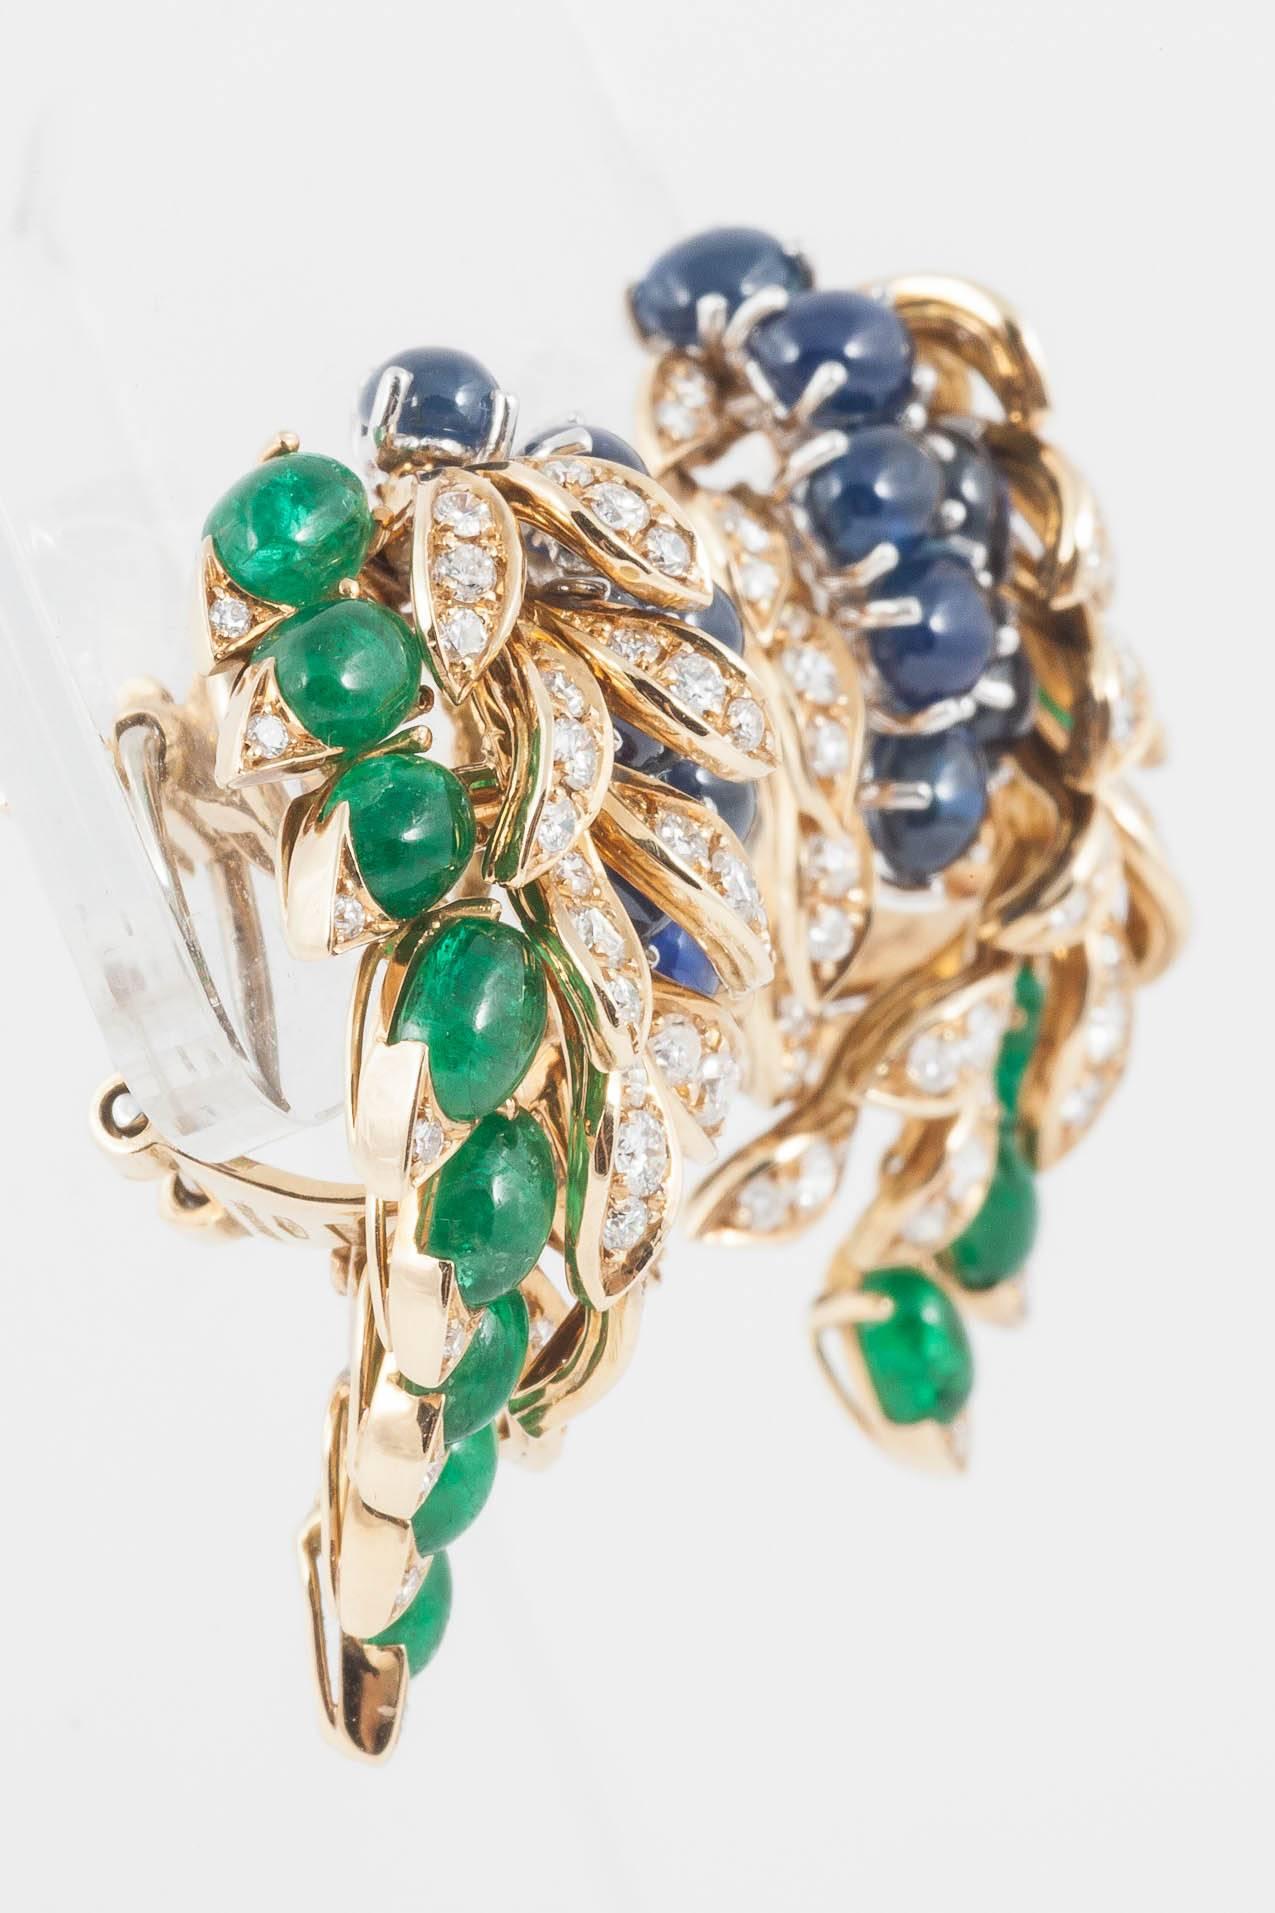 These 1960's 18ct Gold earrings set with natural untreated cabochon - cut Emeralds and Sapphires and round cut Diamonds